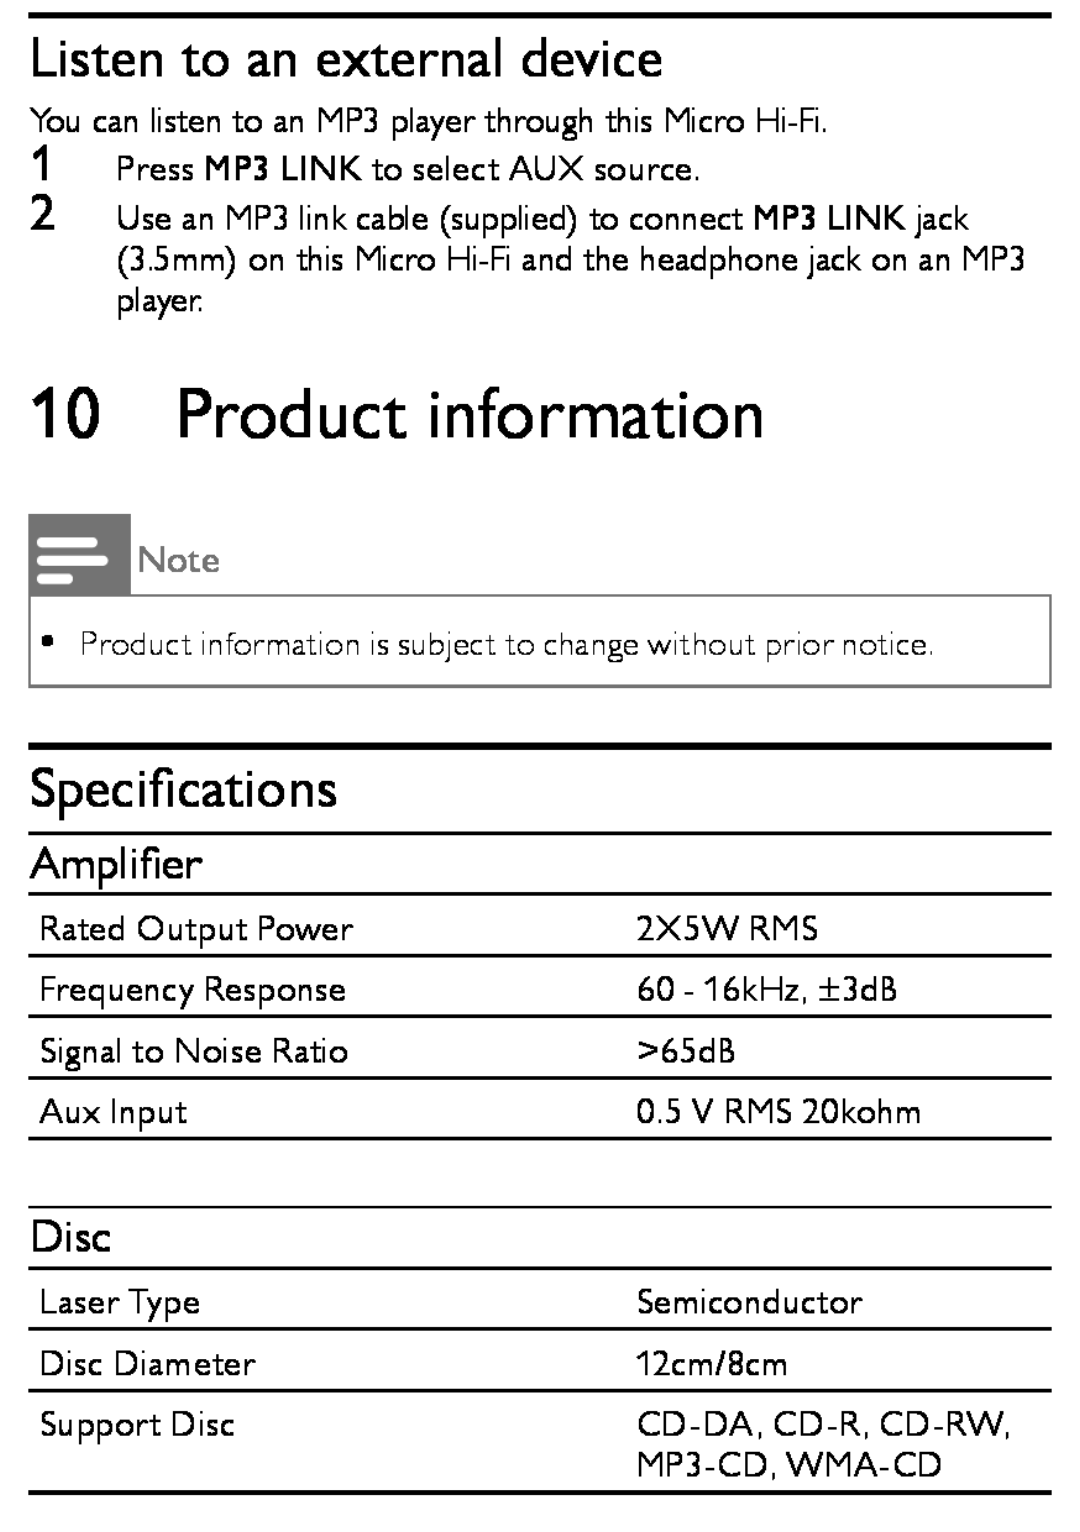 Philips MCM166/12 user manual Product information, Listen to an external device, Speciﬁcations, Ampliﬁer, Disc 